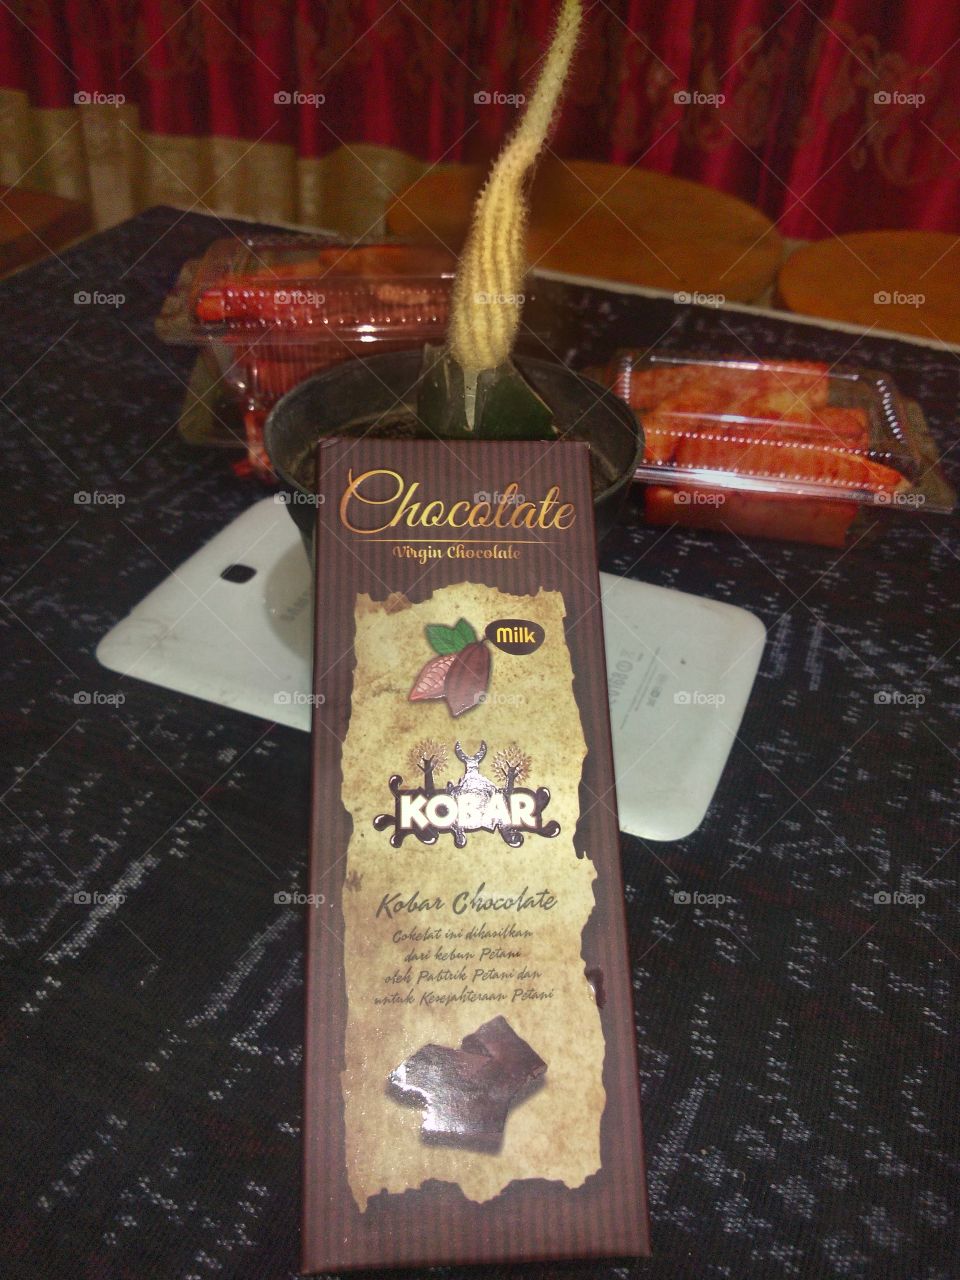 Local Chocolate from Flores Island, Indonesia